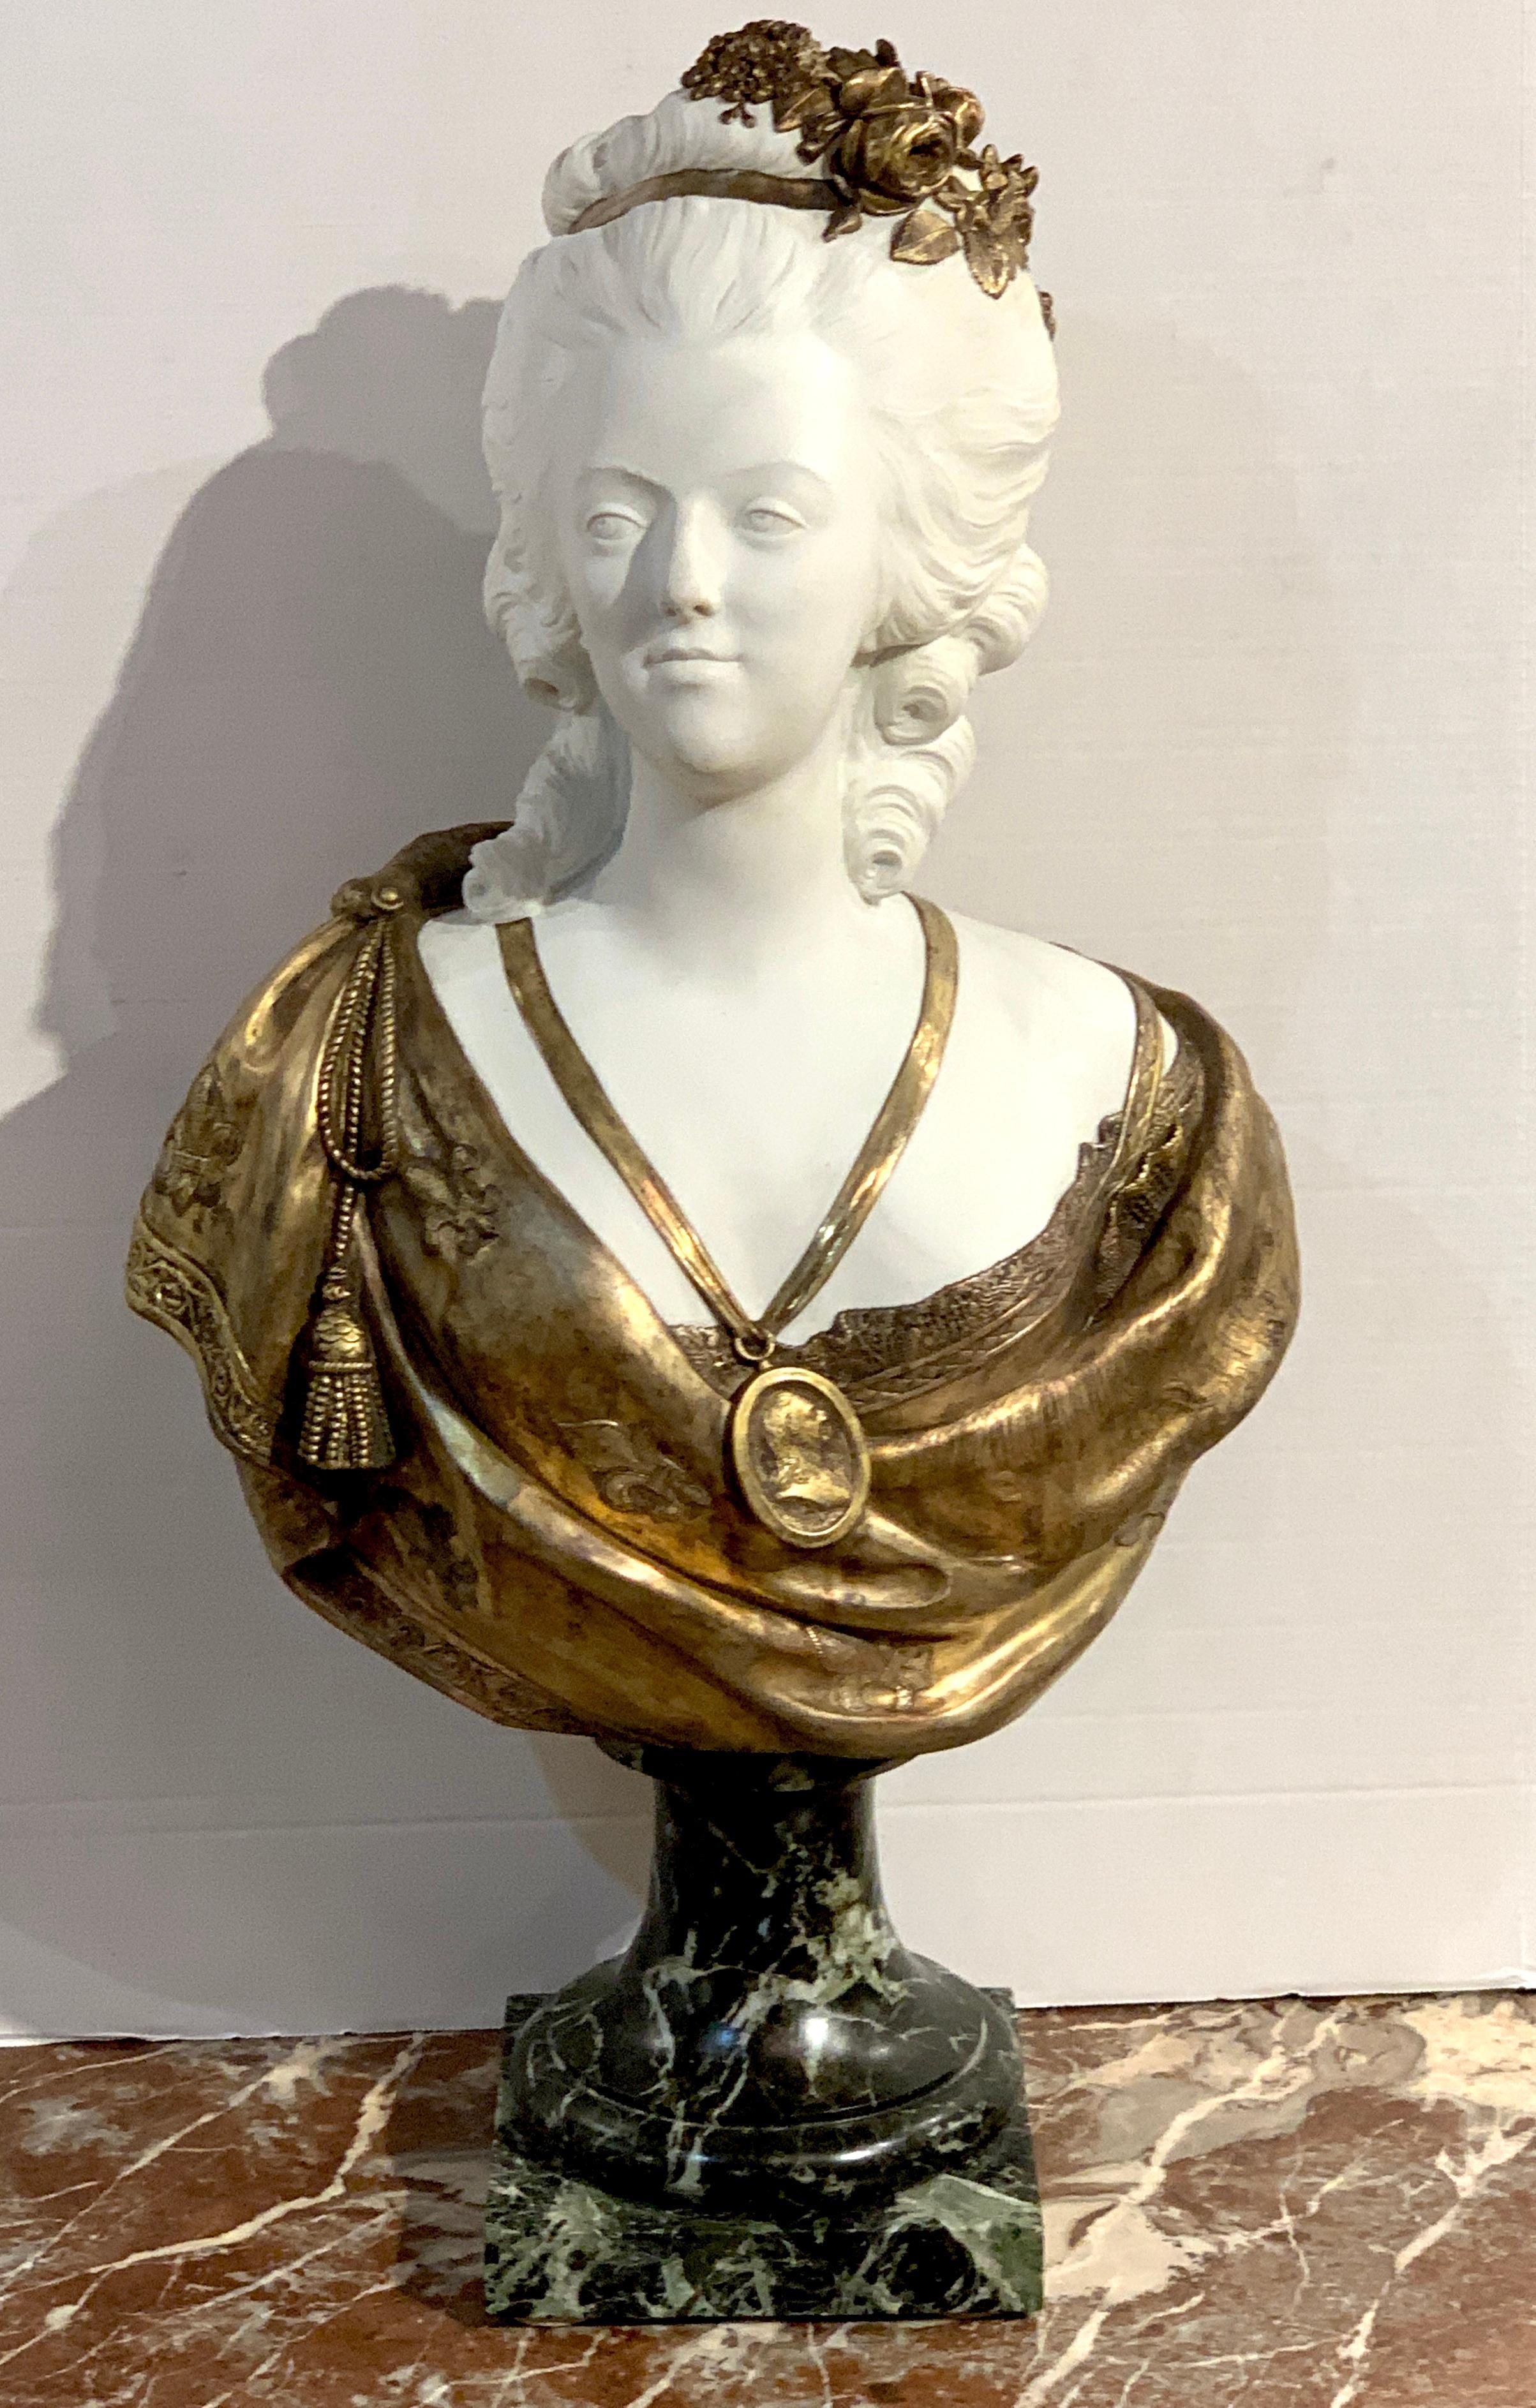 Sèvres (Attributed) biscuit porcelain and ormolu bust of Marie Antoinette after Felix Lecomte (French sculptor 1737-1817) exquisitely cast and modeled, the face in white biscuit porcelain the dress and jewelry in ormolu raised on a 7-inch square